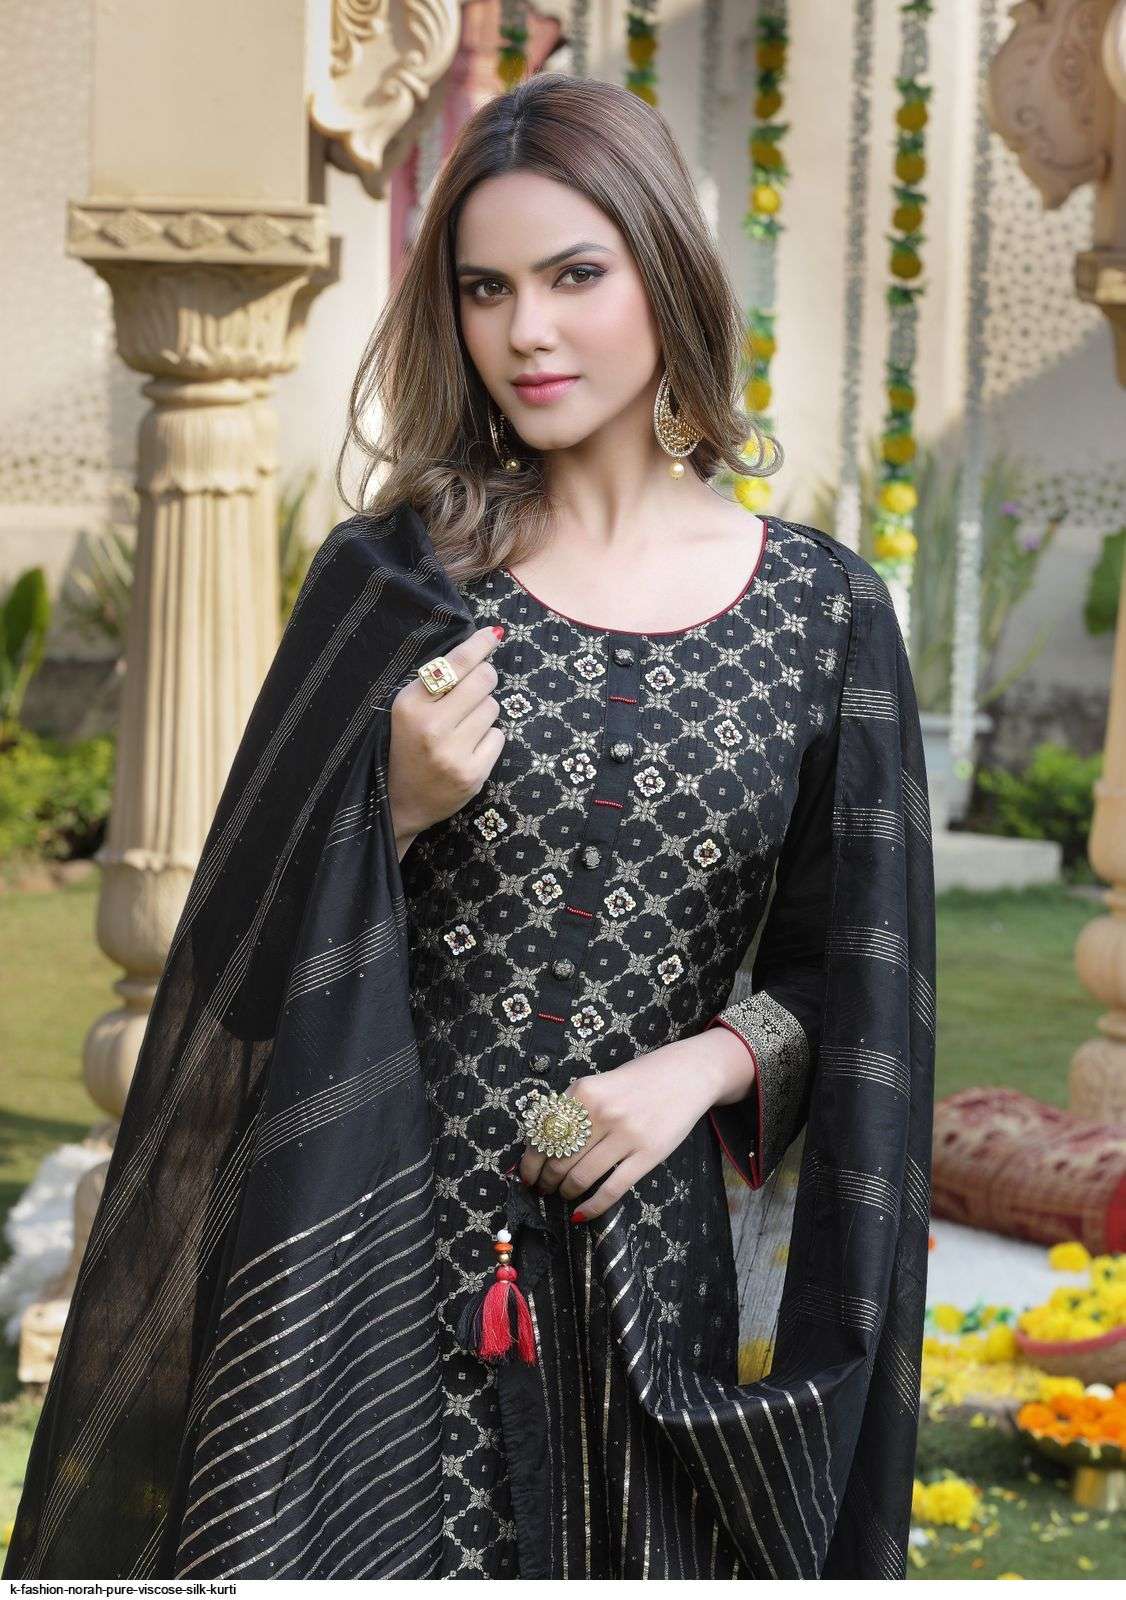 NURAH BY K FASHION W-5 TO W-8 SERIES DESIGNER PAKISTANI SUITS BEAUTIFUL STYLISH FANCY COLORFUL PARTY WEAR & OCCASIONAL WEAR PURE VISCOSE DRESSES AT WHOLESALE PRICE